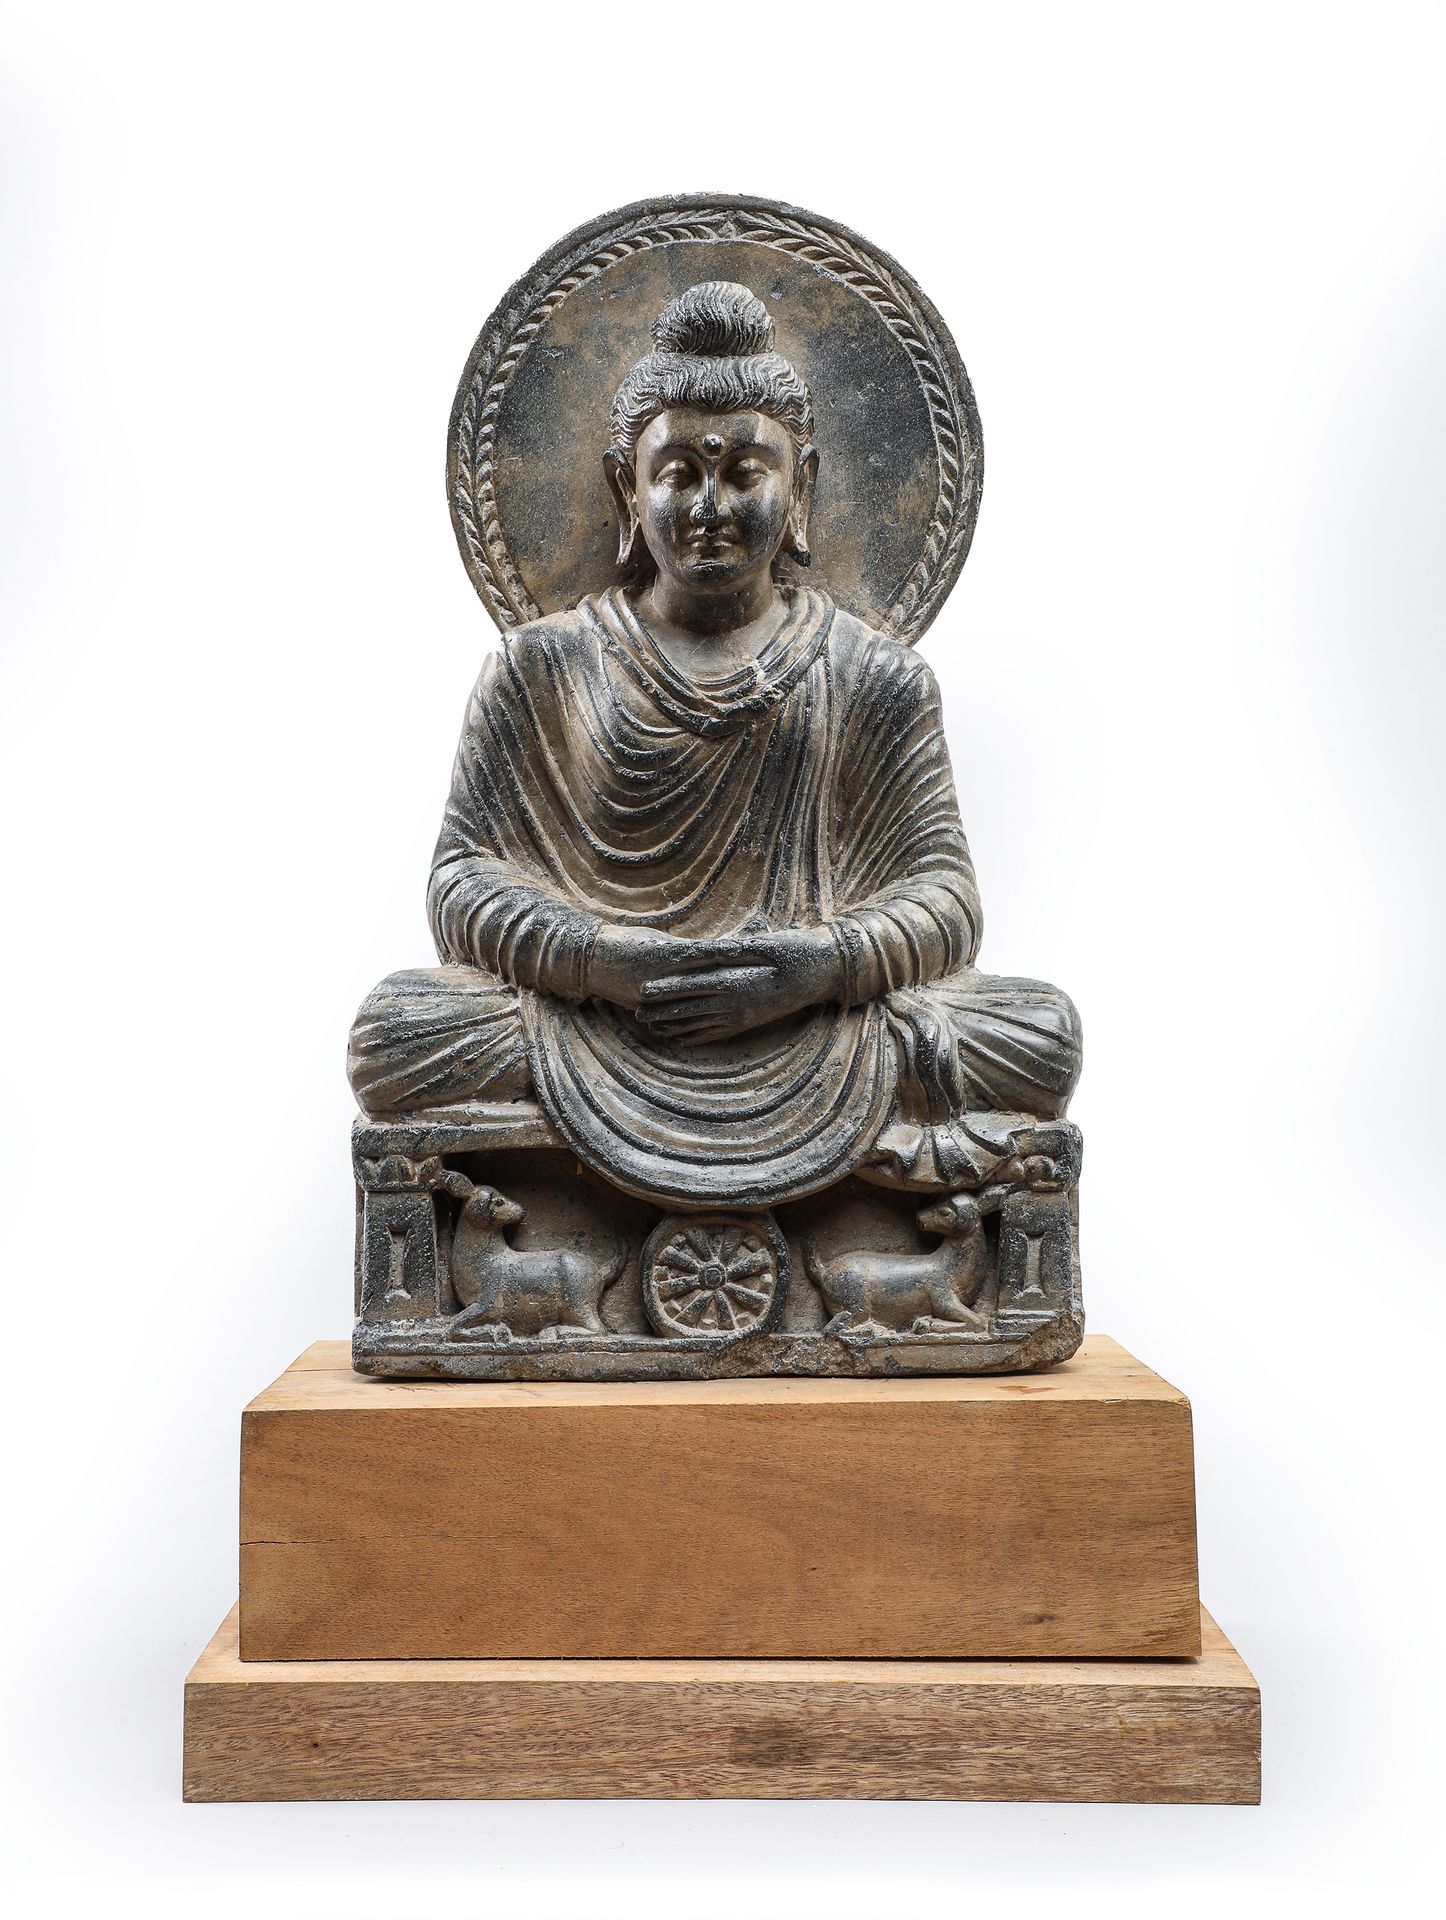 Null 
Seated Buddha in the dyna-mudra position, a meditative gesture, with a man&hellip;